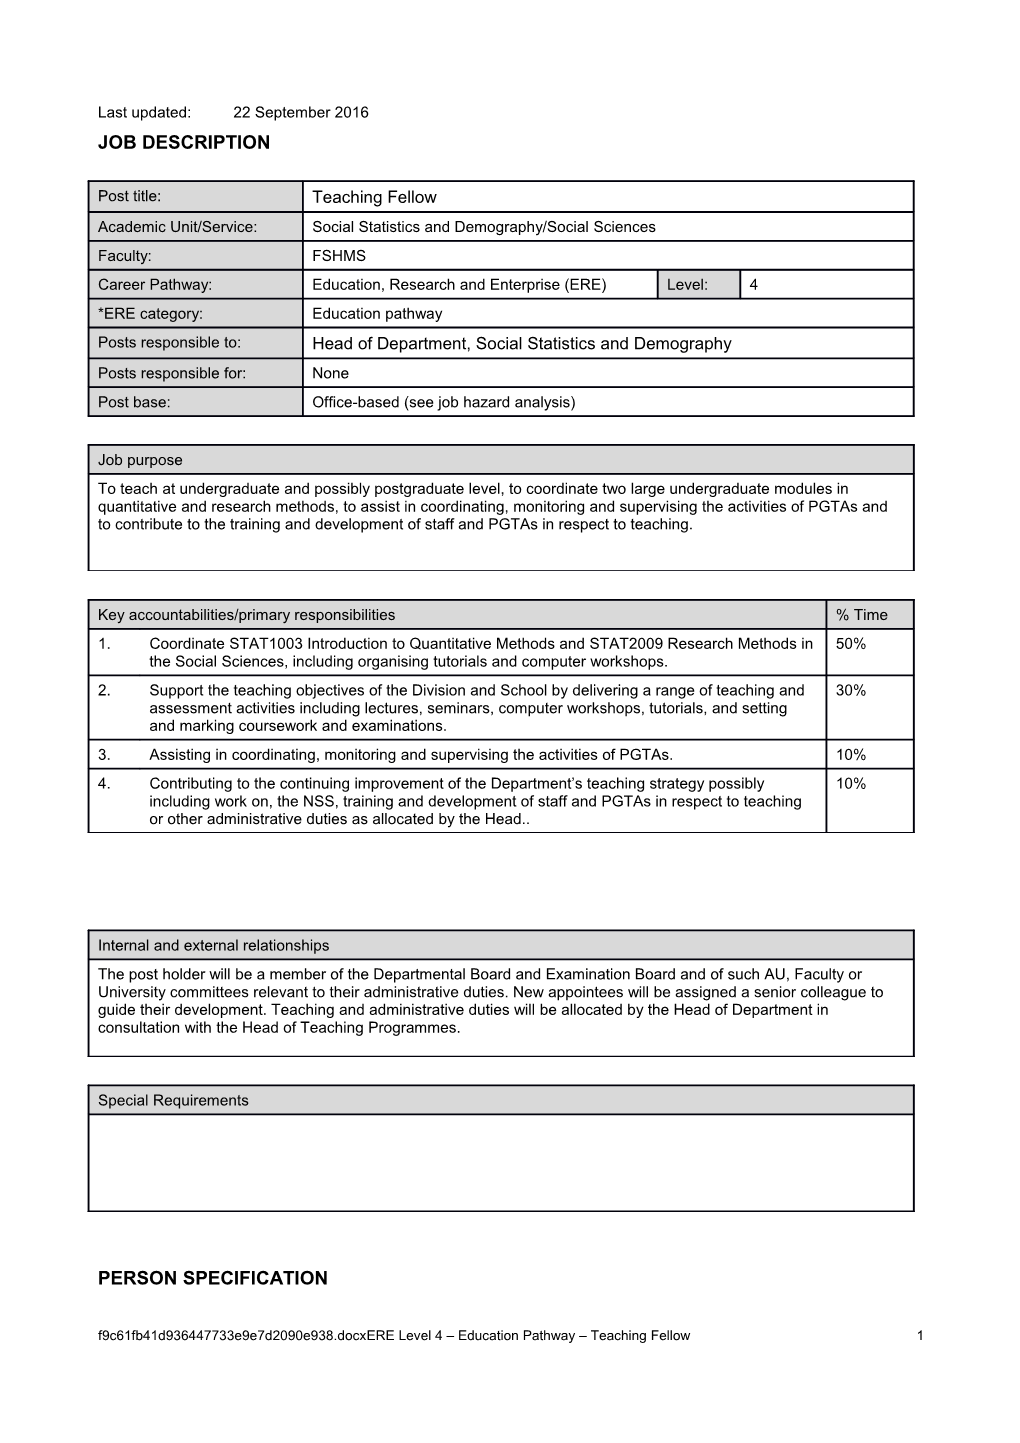 Person Specification s73